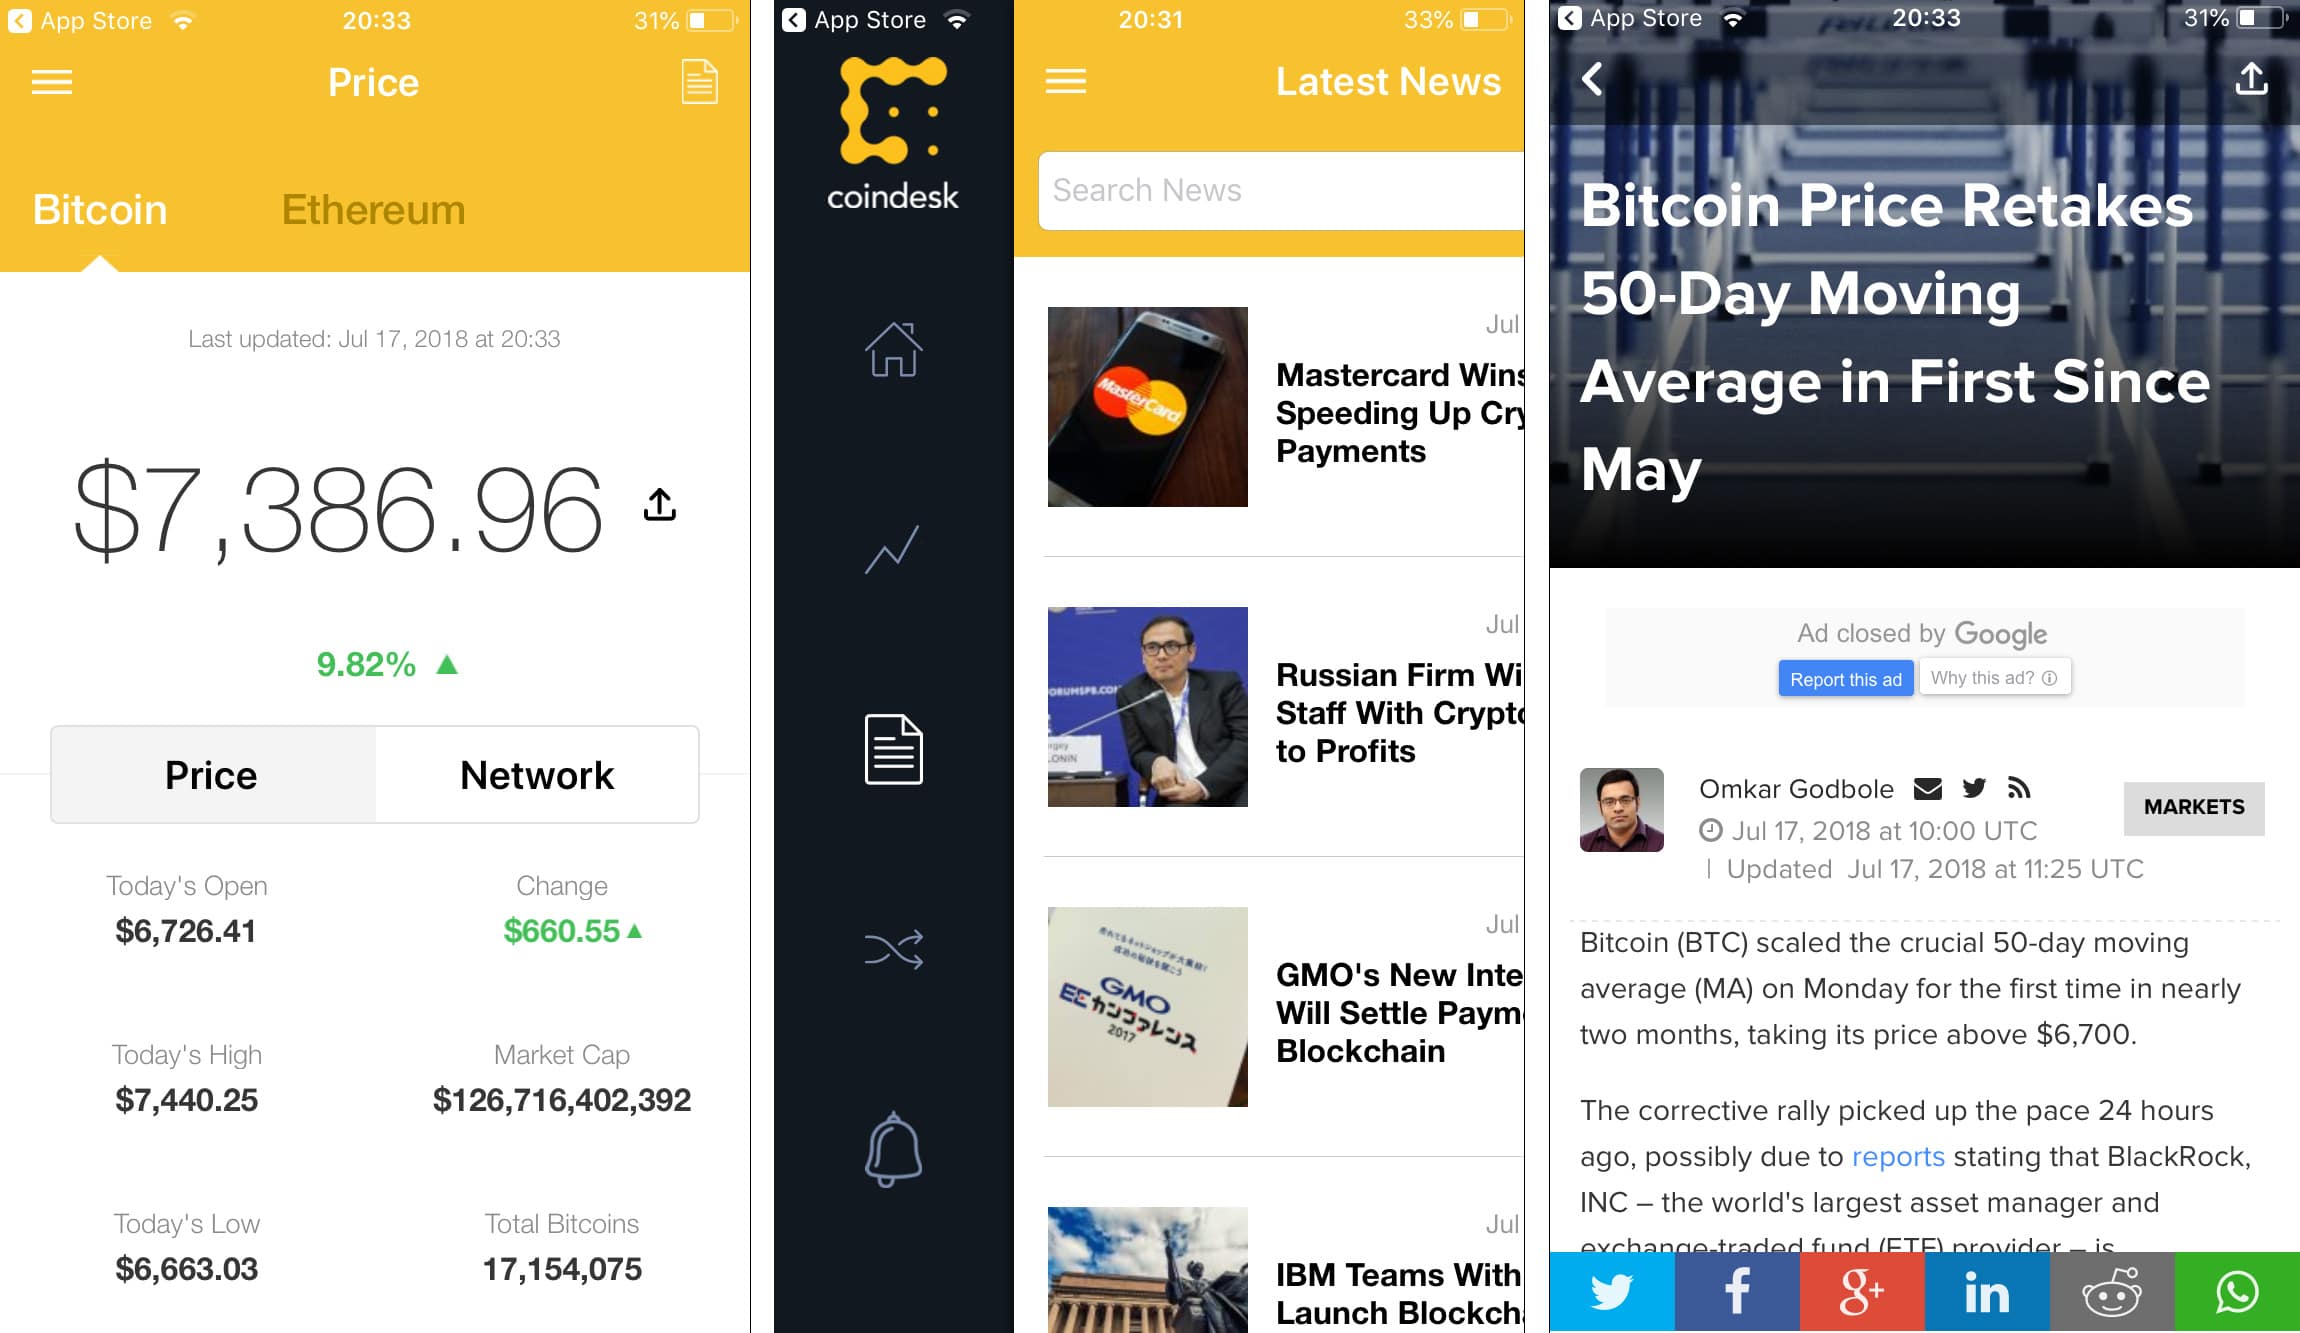 Cryptocurrency App, Coindesk, is a crypto news app. The first screenshot shows an Ethereum price change, the second shows the latest news, and the third shows a specific article.